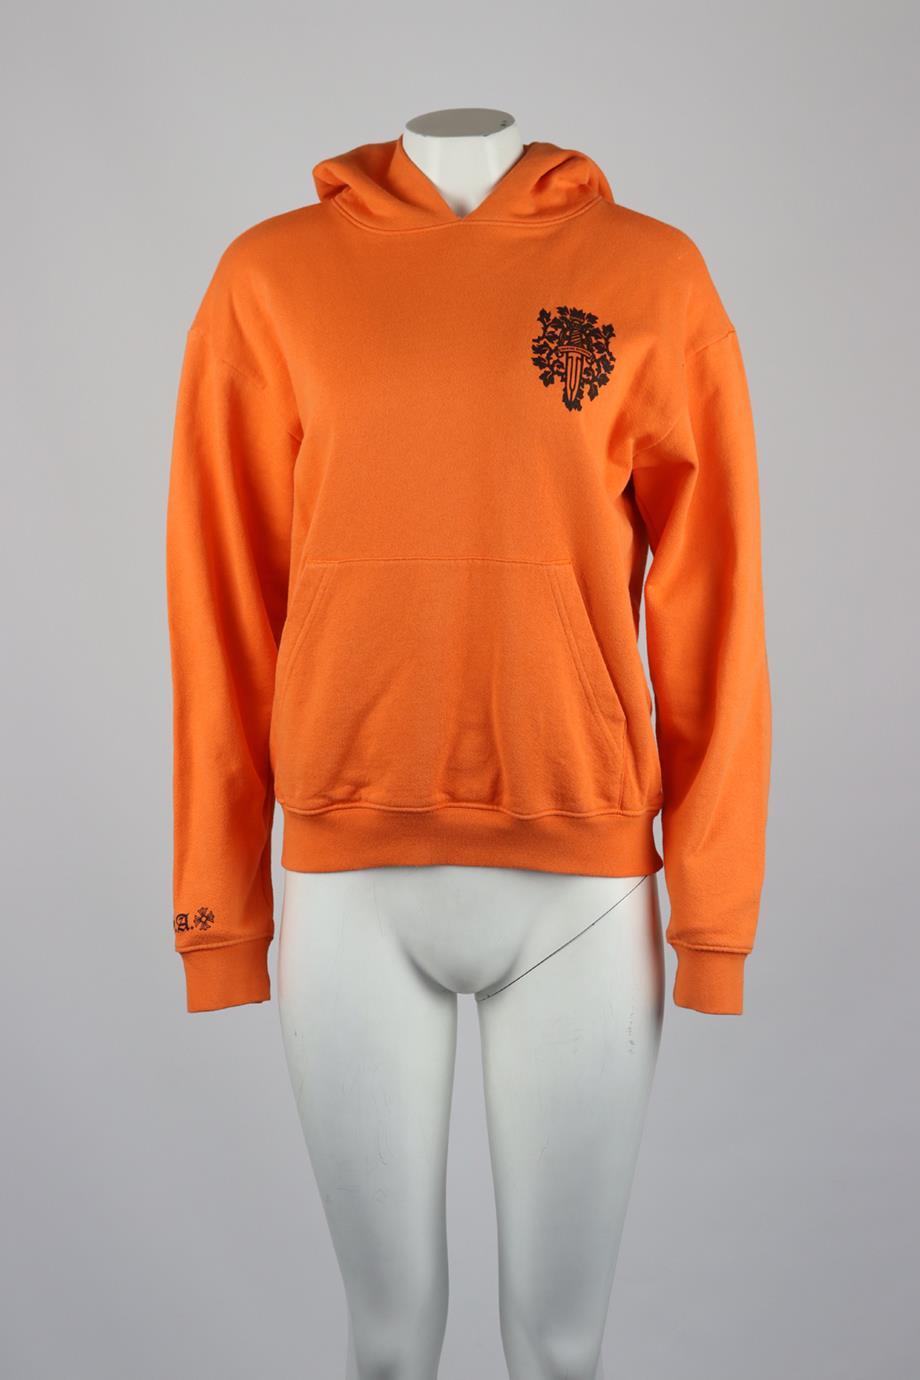 Chrome Hearts Printed Cotton Jersey Hoodie. Orange. Long Sleeve. Crewneck. Slips on. 100% Cotton. Size: Medium (UK 10, US 6, FR 38, IT 42). Bust: 40.6 In. Waist: 39.5 In. Hips: 36.8 In. Length: 23.1 In. Condition: Used. Very good condition - Light